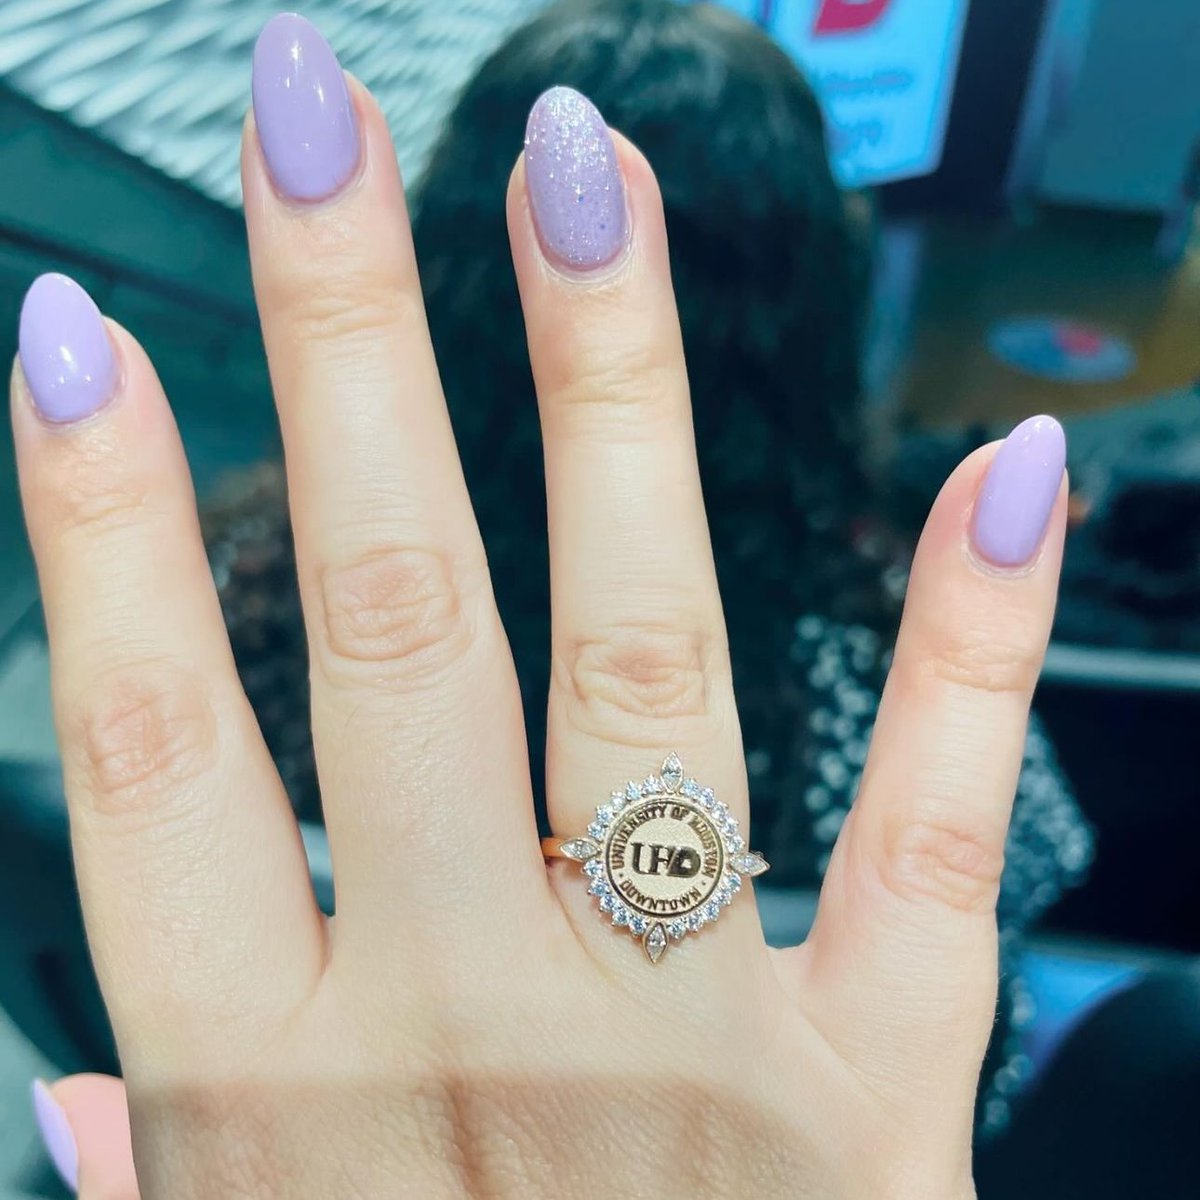 'Put a ring on my finger.' -Sonia Sánchez 💍🎉  

📸 soniasanchez.htx | #HerffJones #HJClassRing cute class rings #RingCeremony college jewelry #ClassRing Ring Ceremony #collegerings